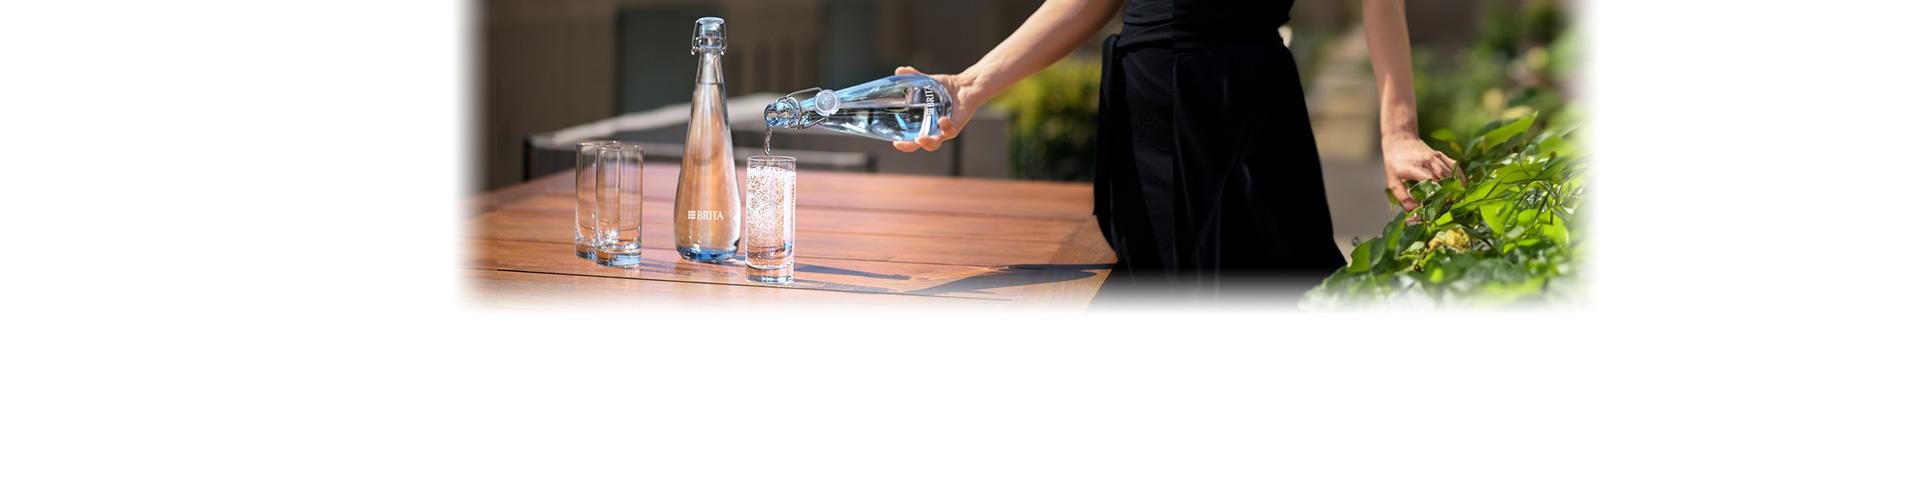 Woman pouring bottle of sparkling water